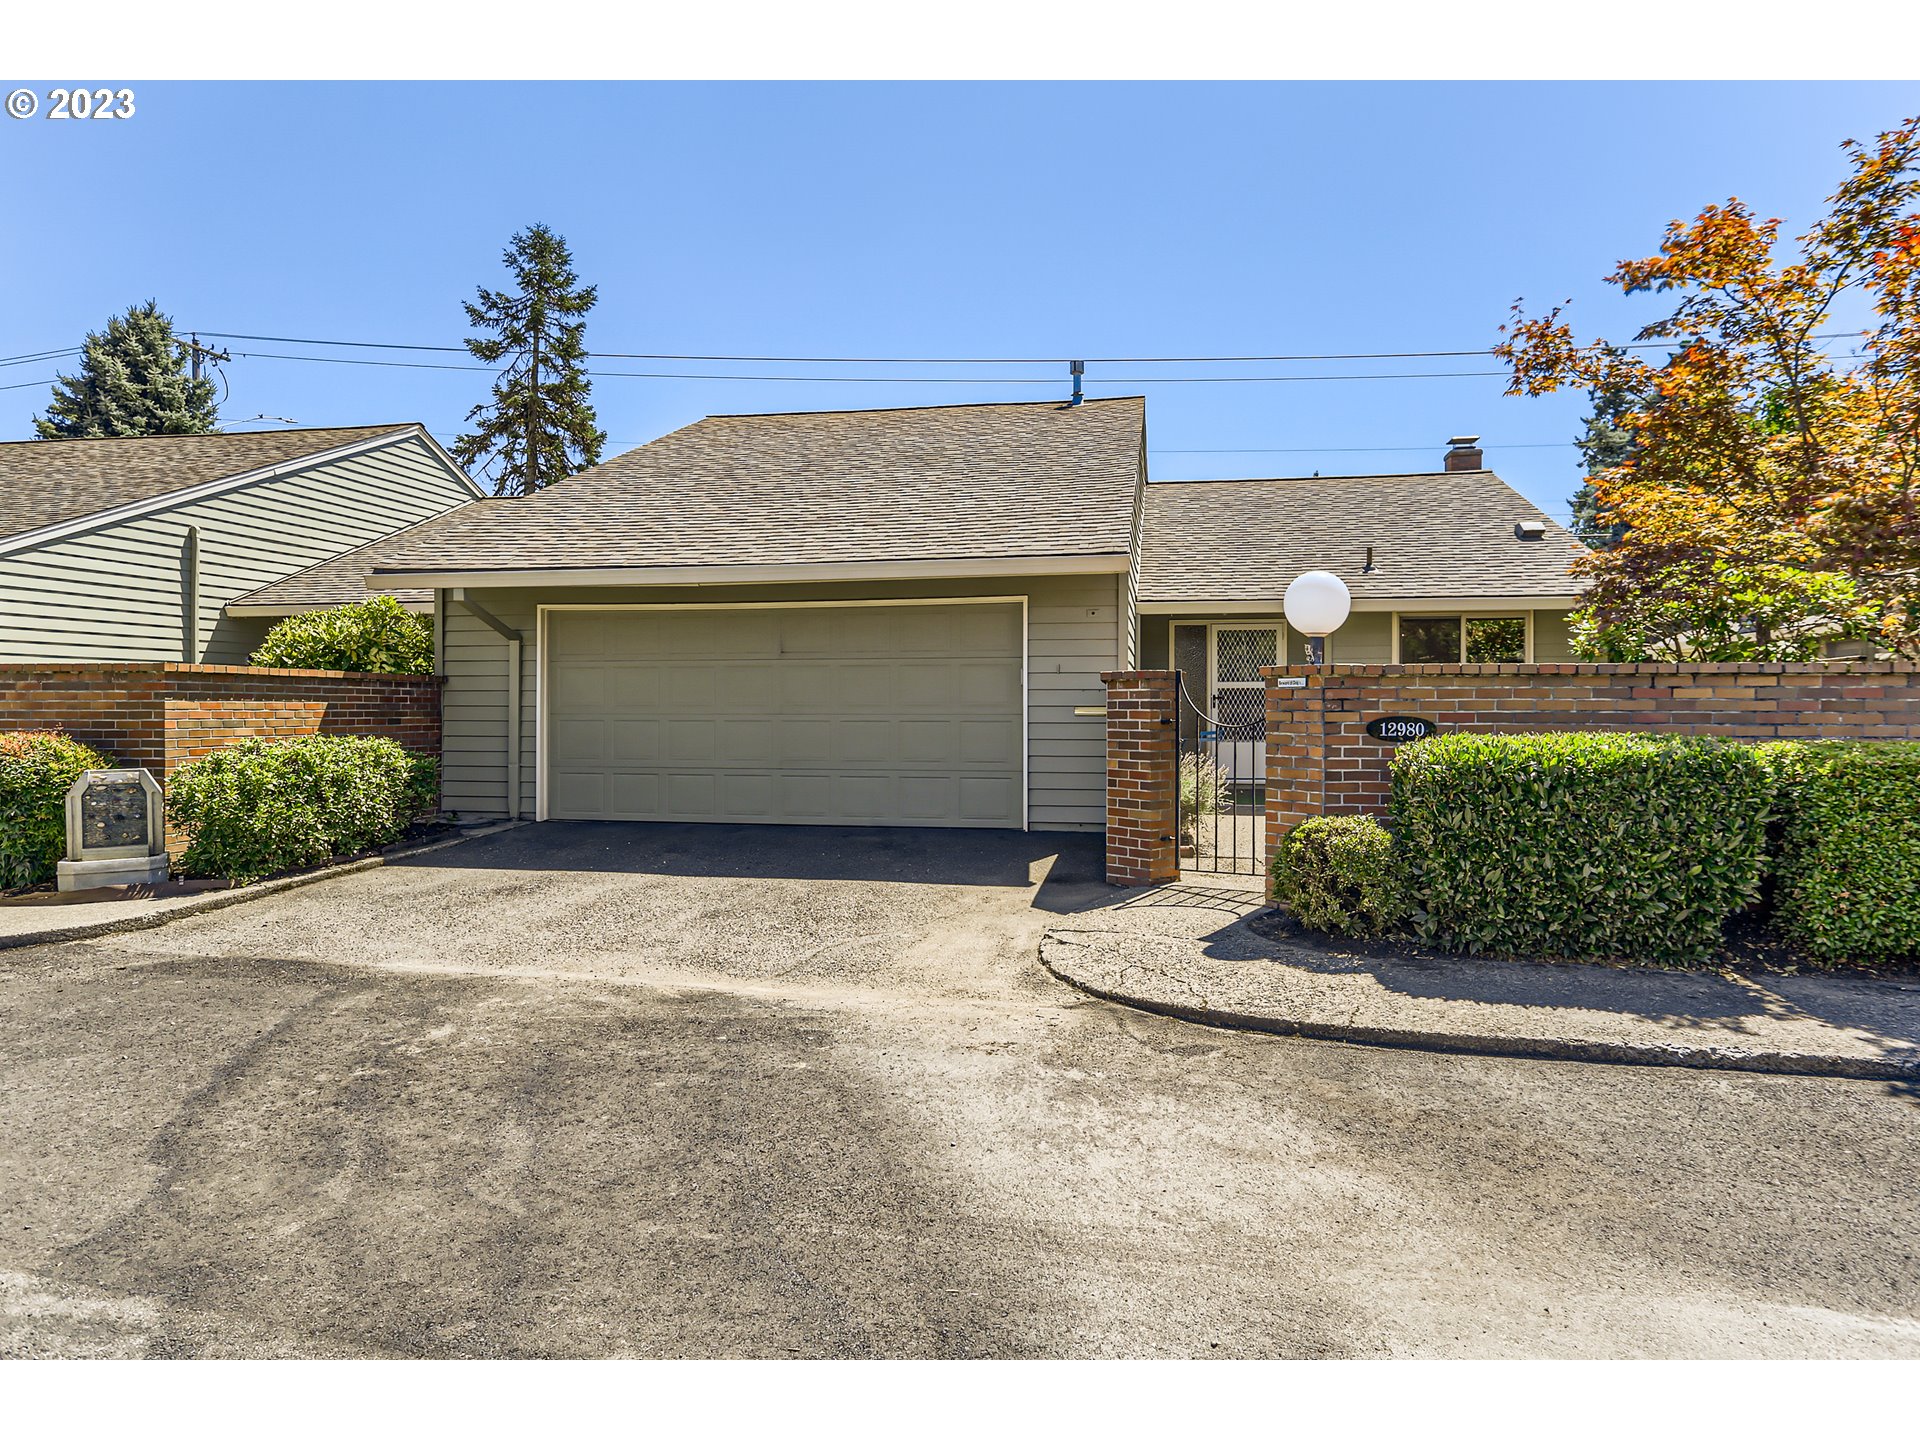 View main image for listing located at: 12980 SW Carmel St